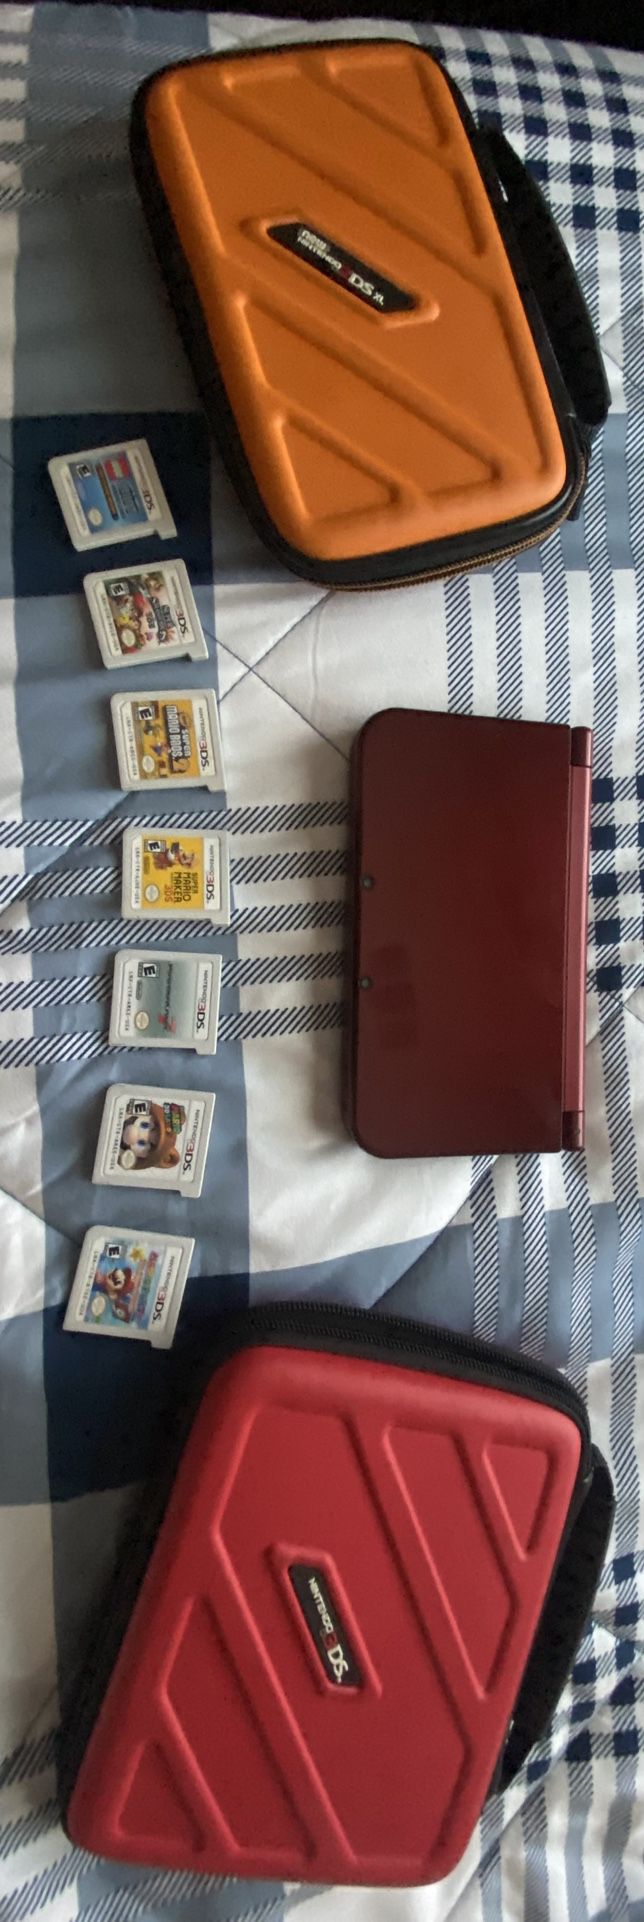 New Nintendo 3ds Xl Red